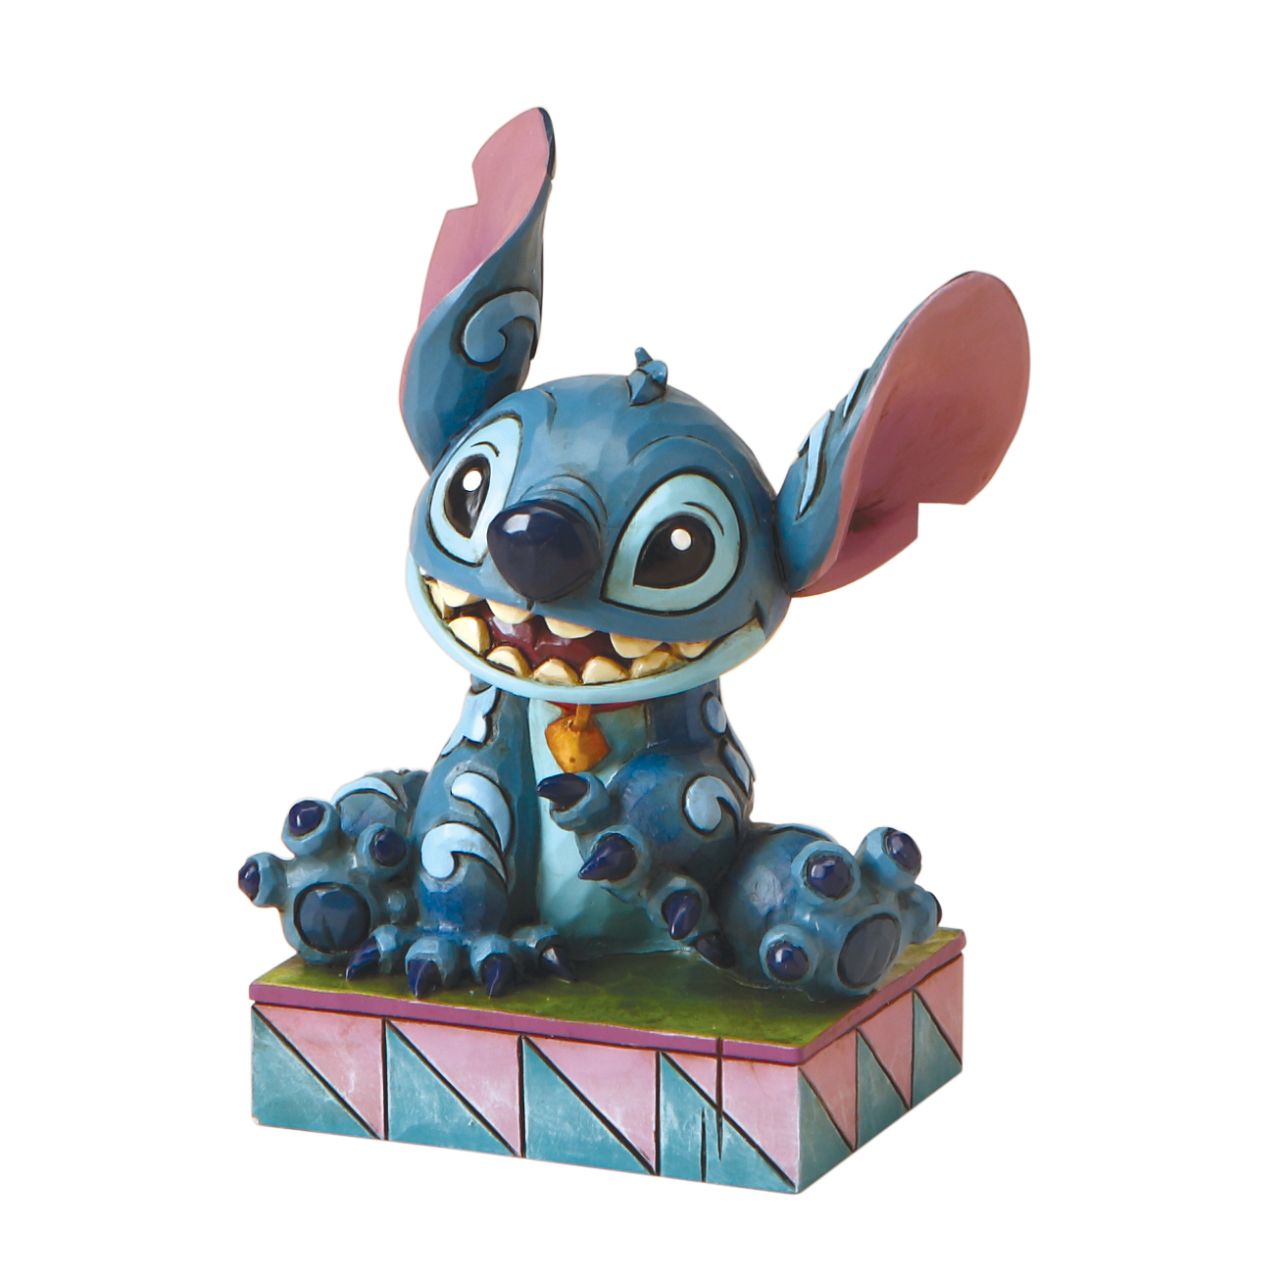 Jim Shore Stitch Ohana Means Family  Designed by award winning artist and sculptor, Jim Shore for the Disney Traditions brand, this Stitch figurine is a part of a personality poses collection. He is featured displaying his typical mischievous smile.